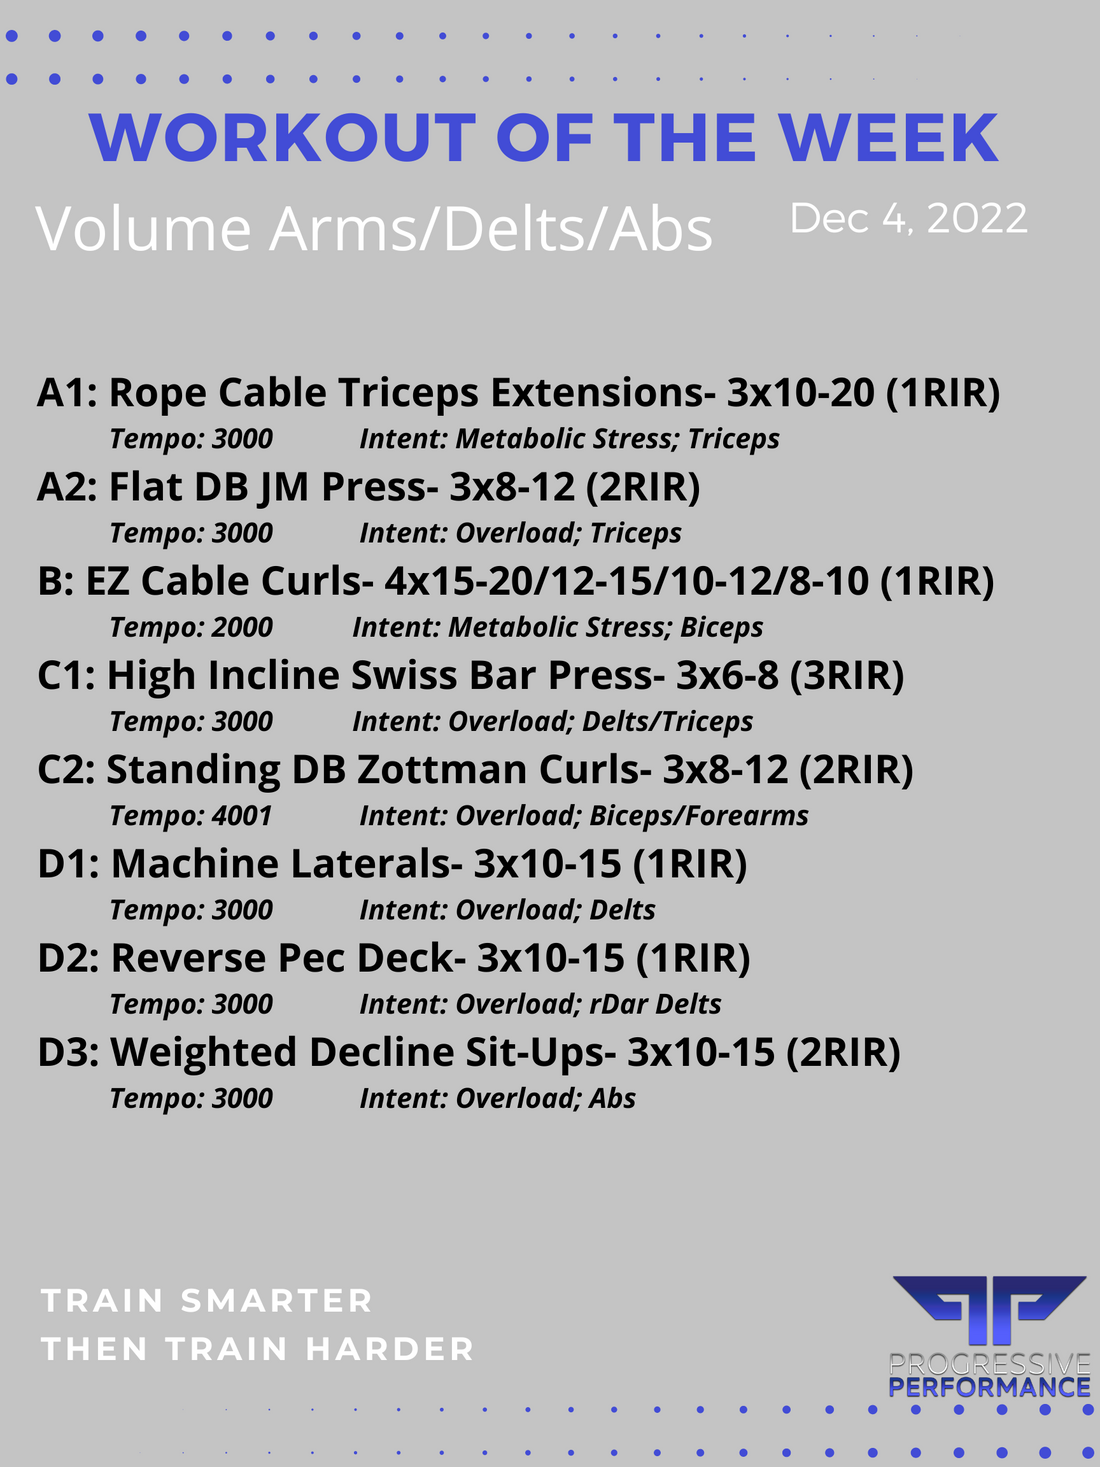 Volume Delts/Arms/Abs